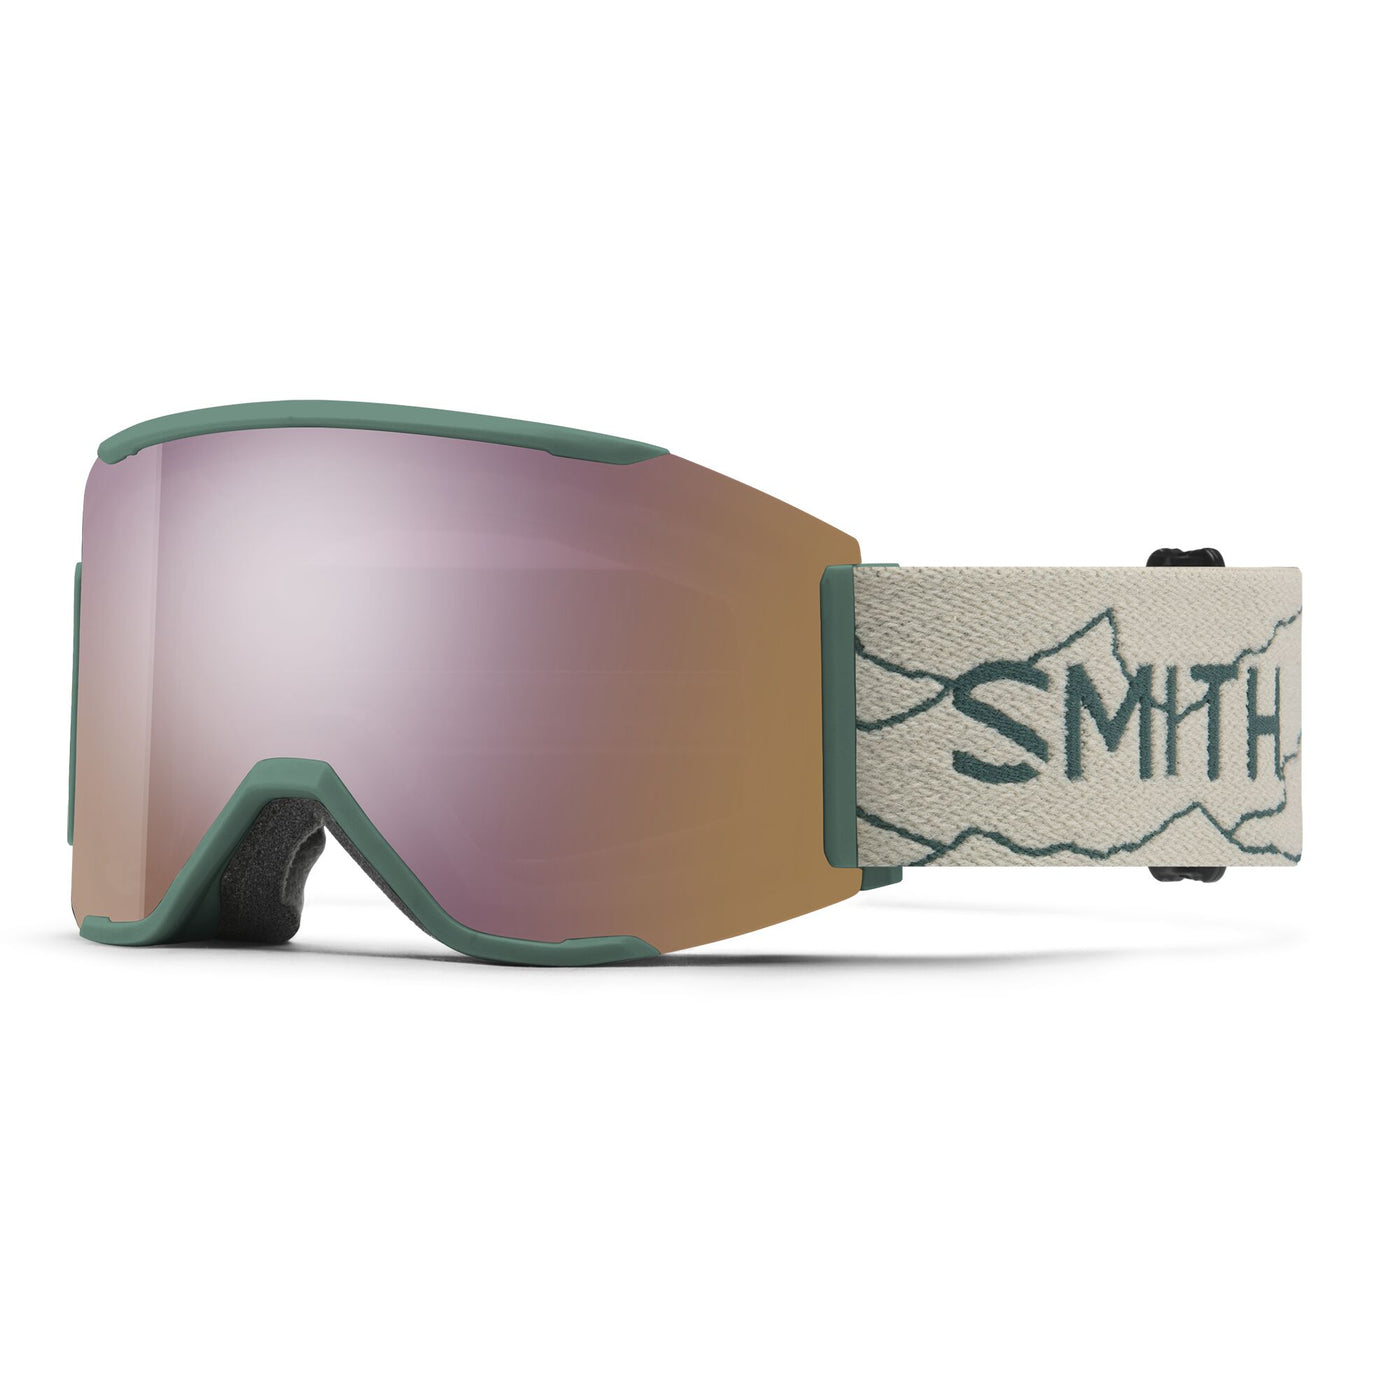 Smith 24 Squad MAG - AC Elena Hight - CP Evday Rose Gold Mirror/CP Storm Rose Flash